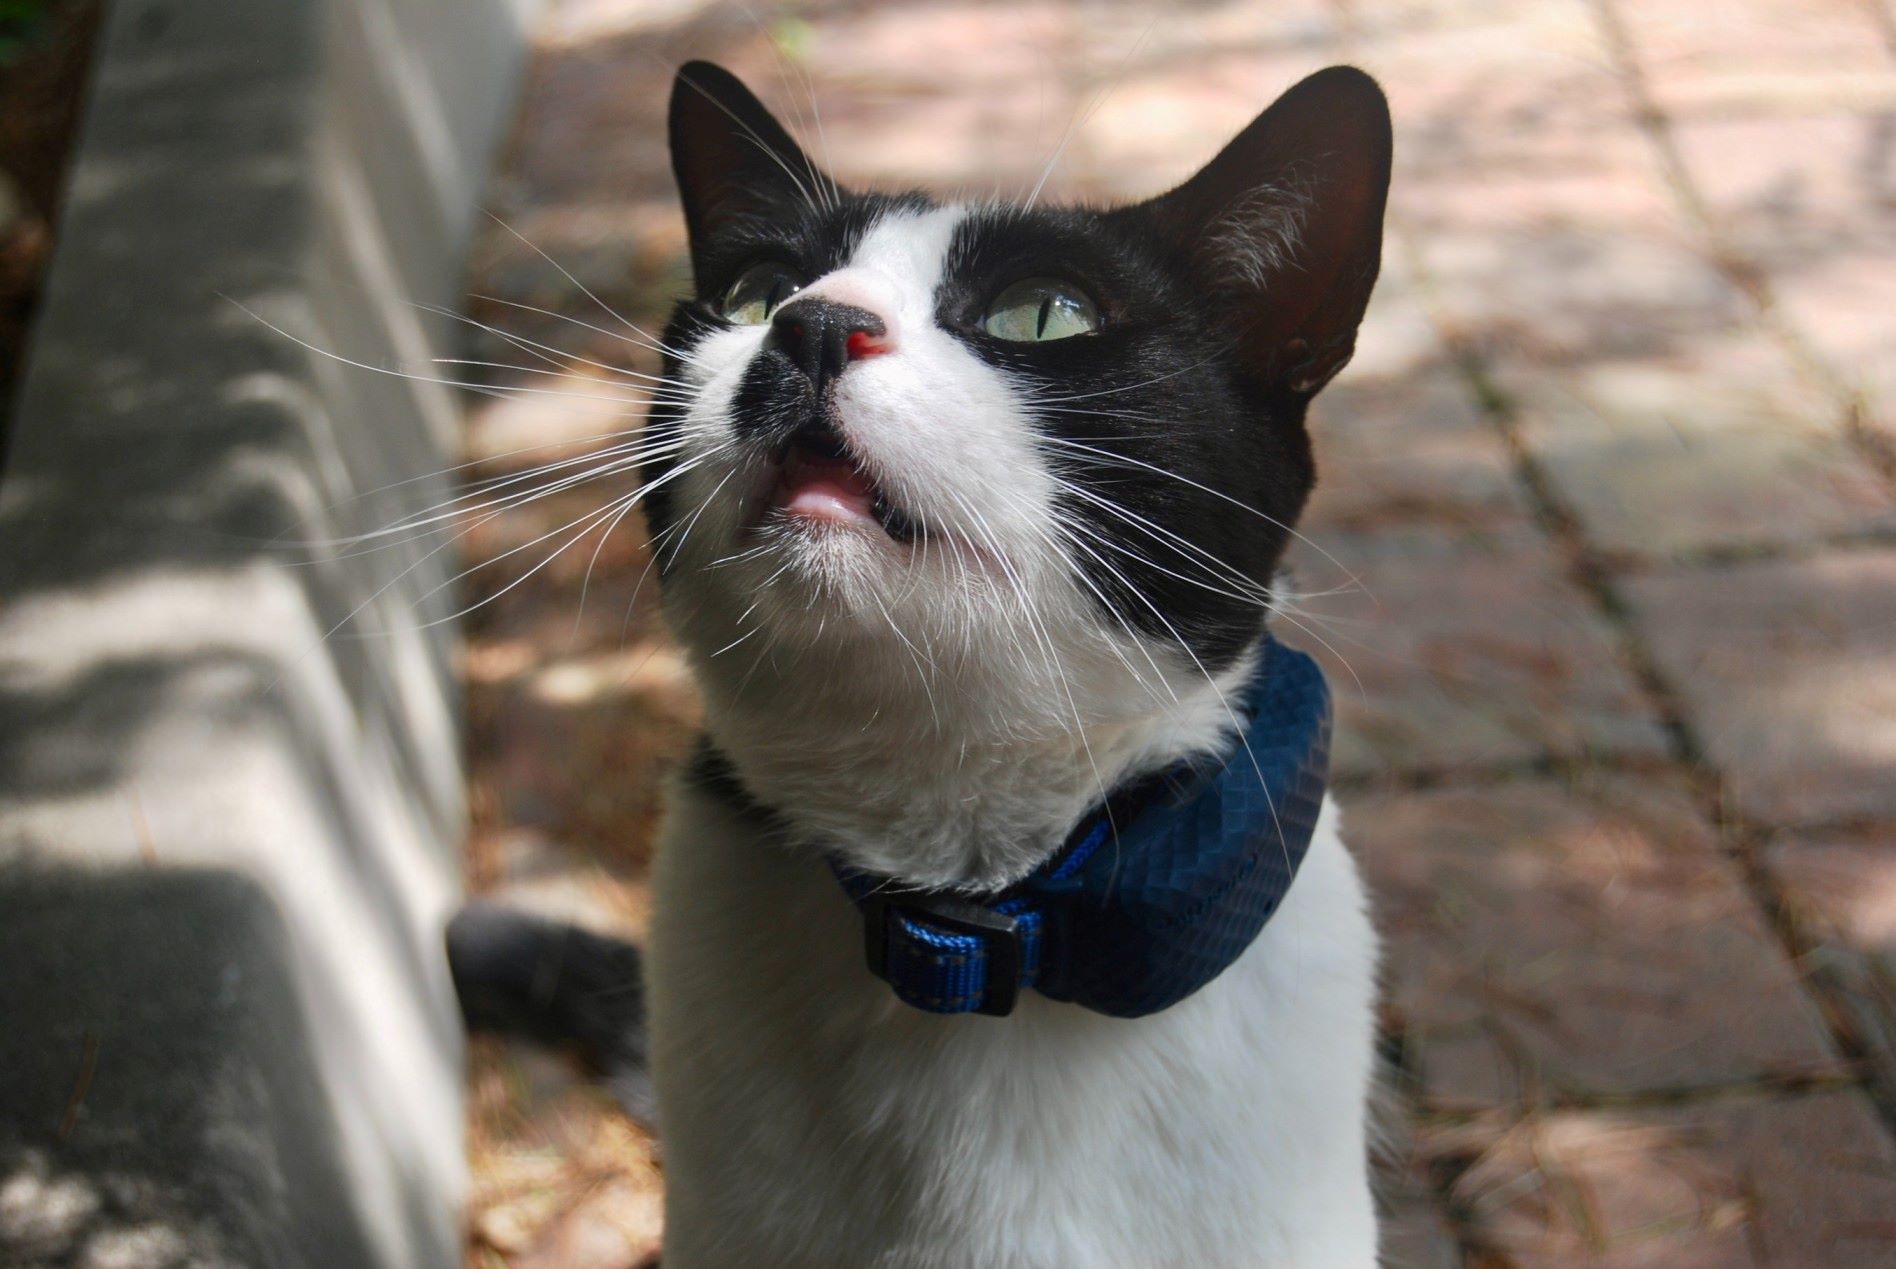 A cat wearing a Tractive GPS tracker in a sunny area outdoors